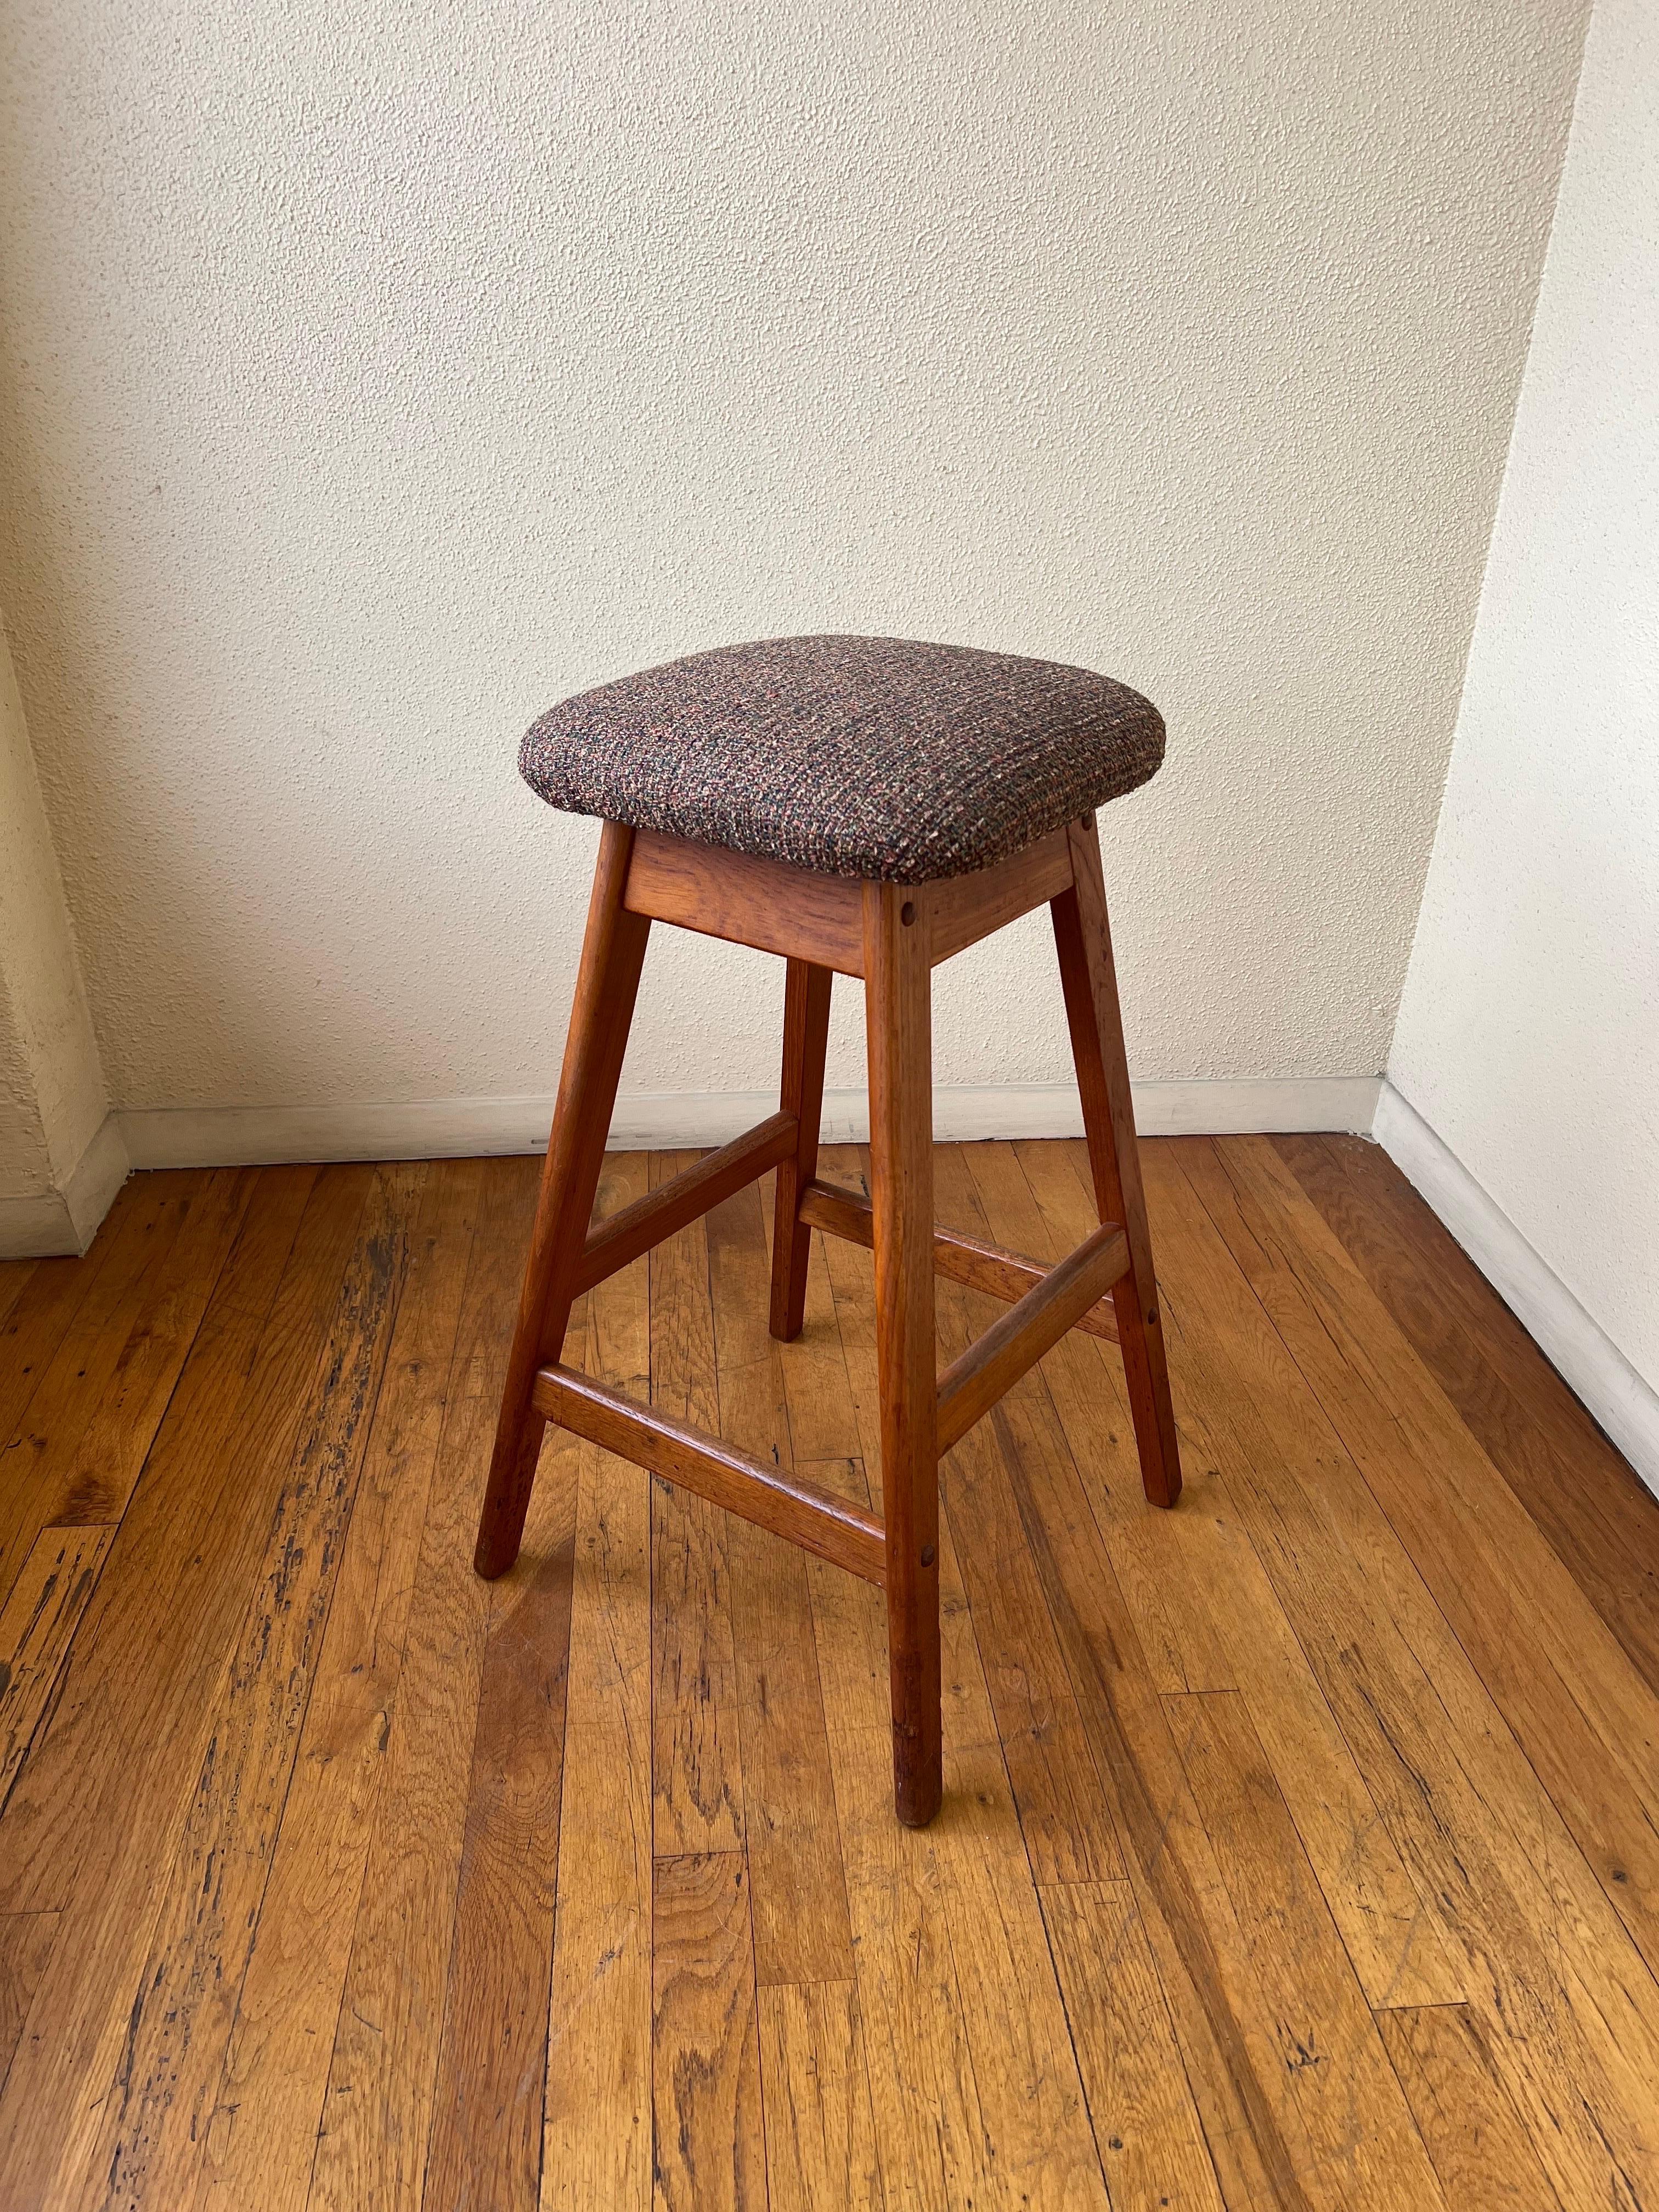 Danish modern single stool by Vamdrup Stolefabrik, nice solid and sturdy versatile great for extra sitting.